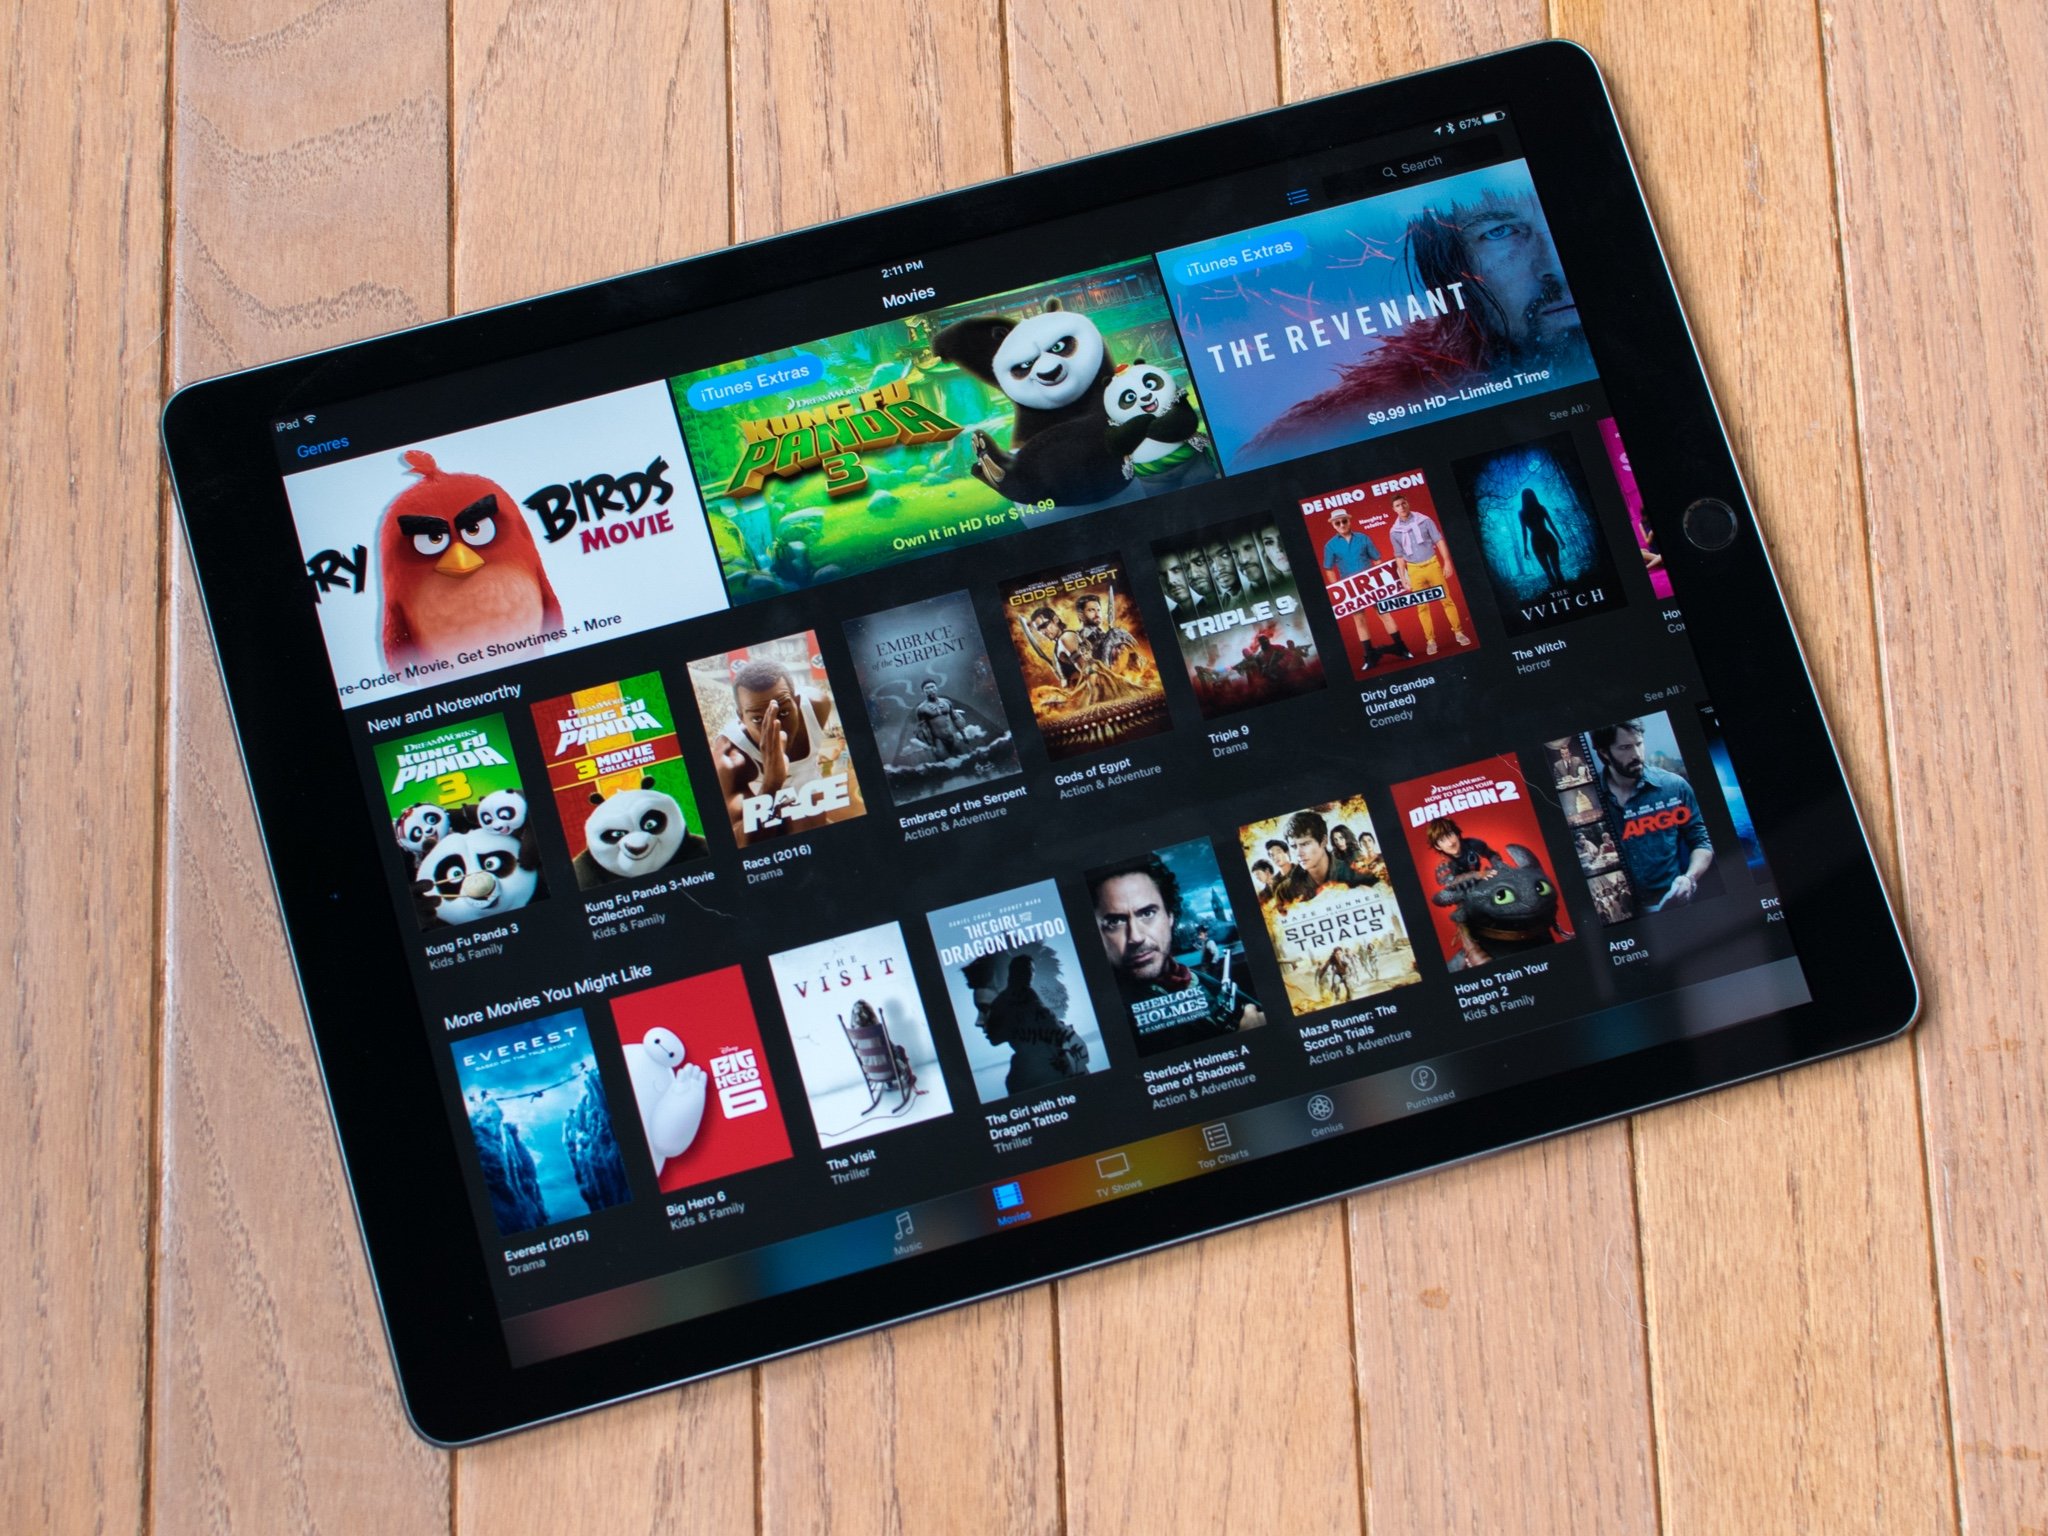 How to download music, movies, TV shows, and ringtone from the iTunes Store on iPhone and iPad